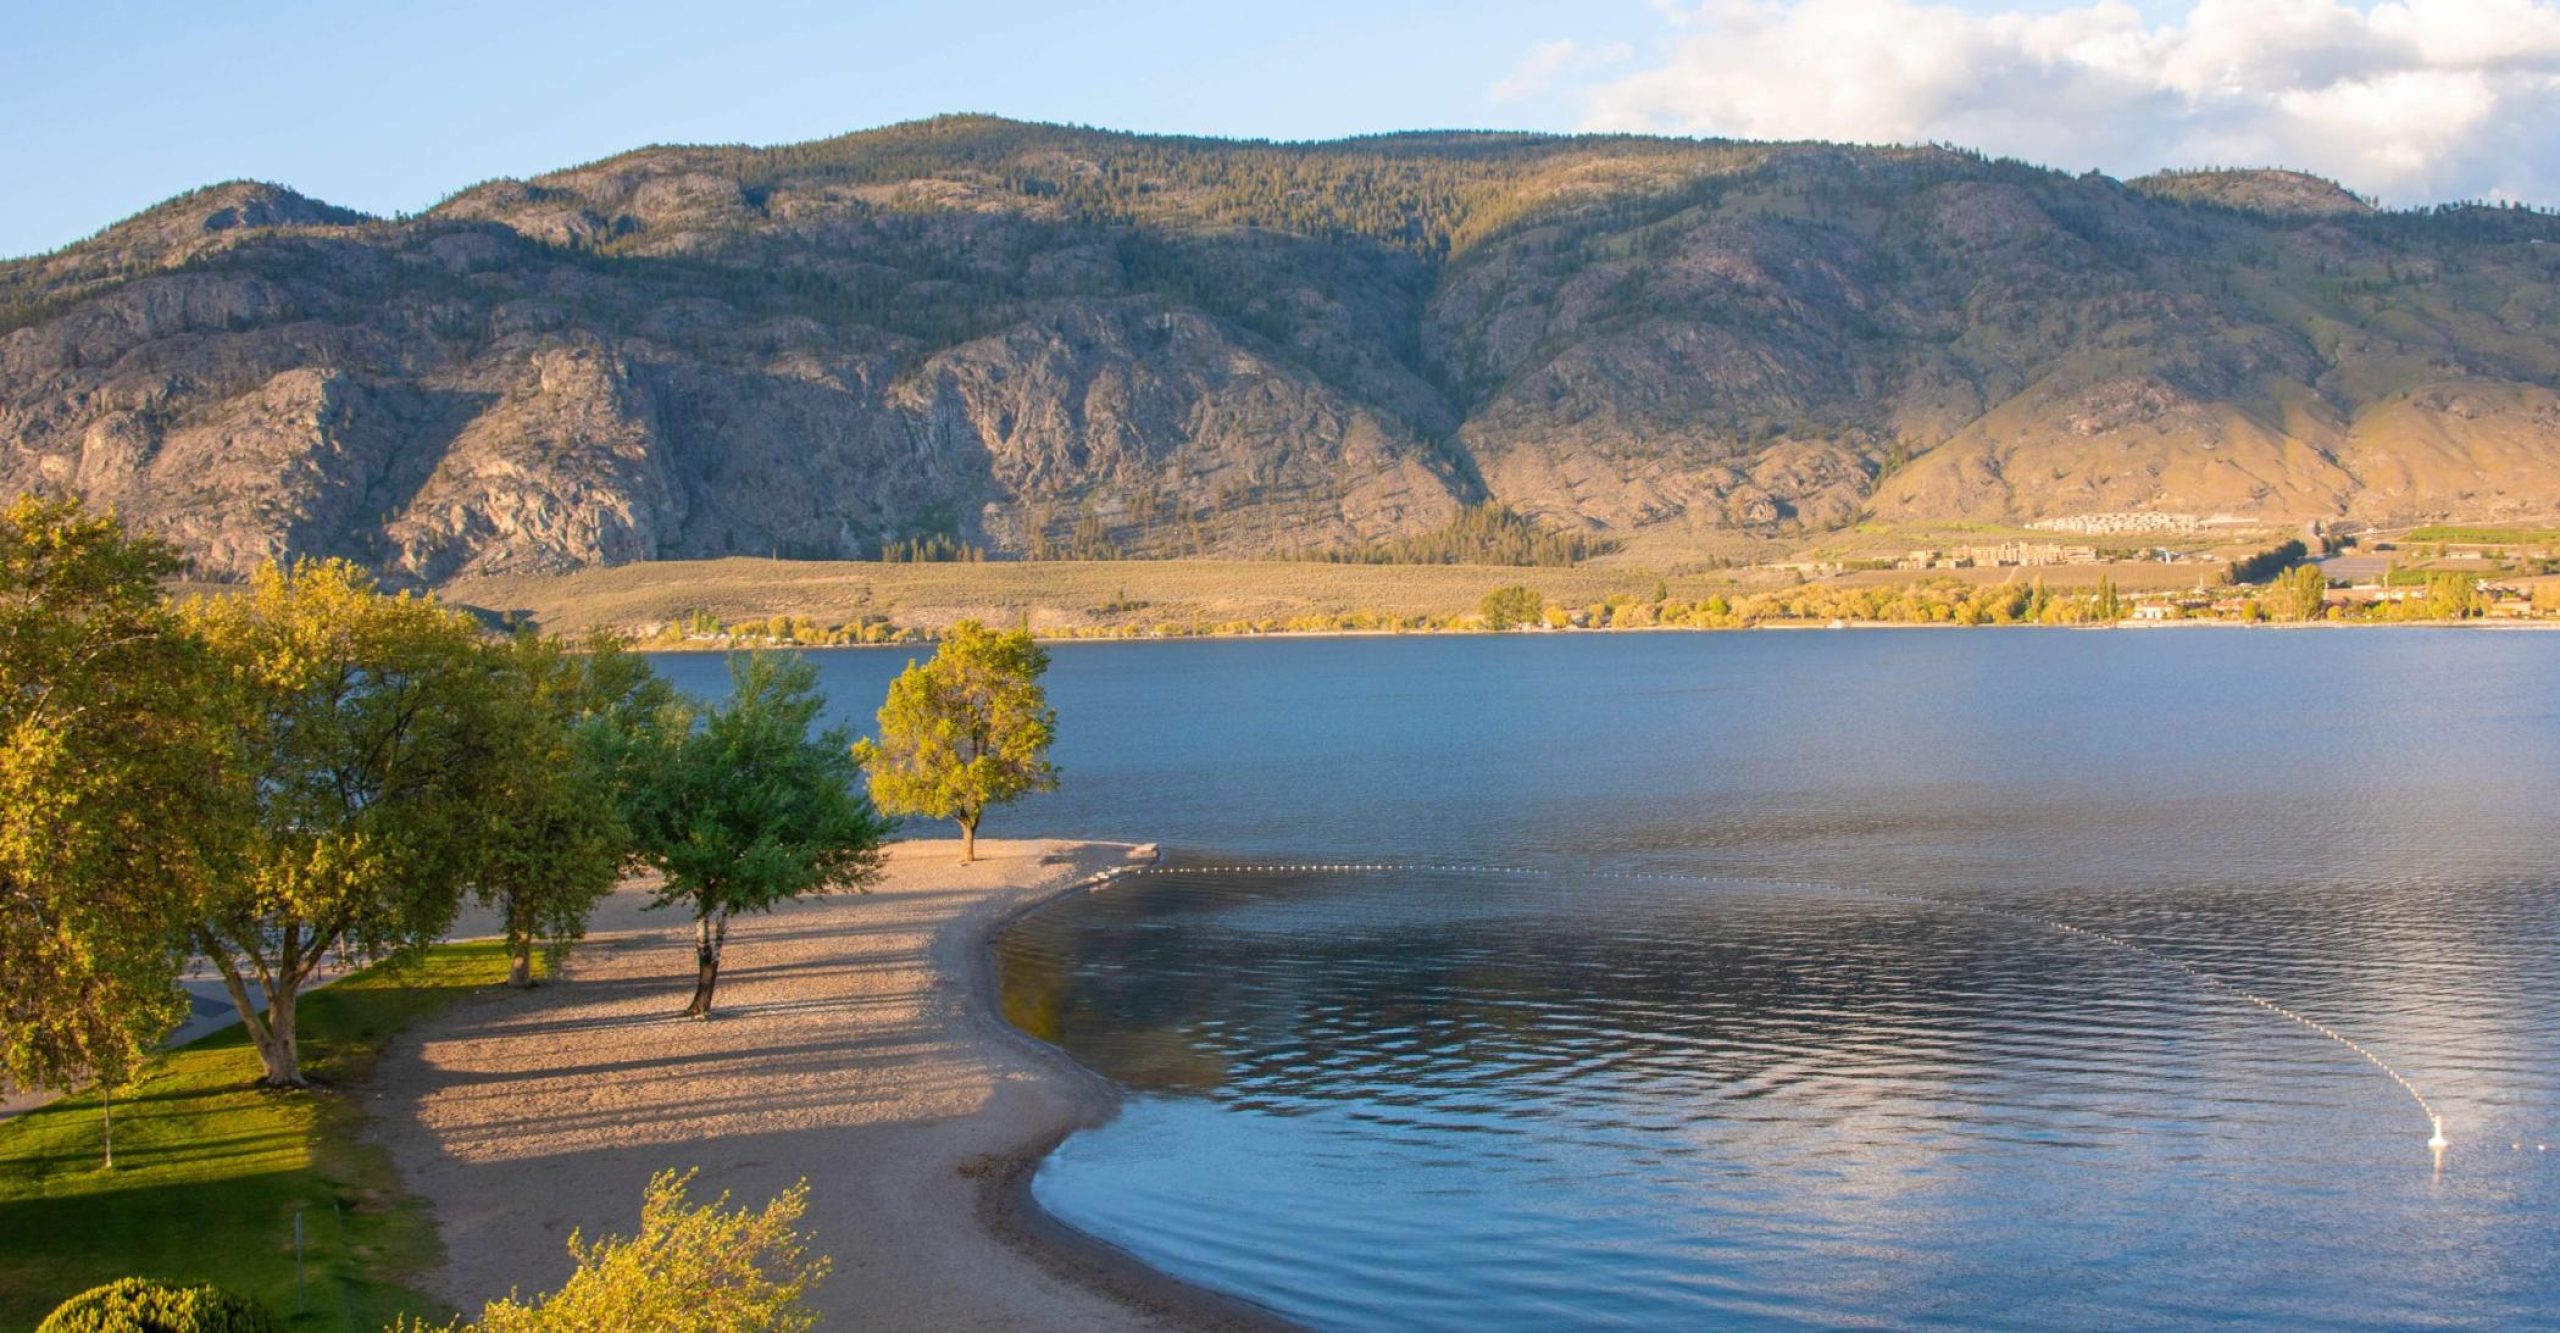 Make memories to last a lifetime in picturesque Osoyoos